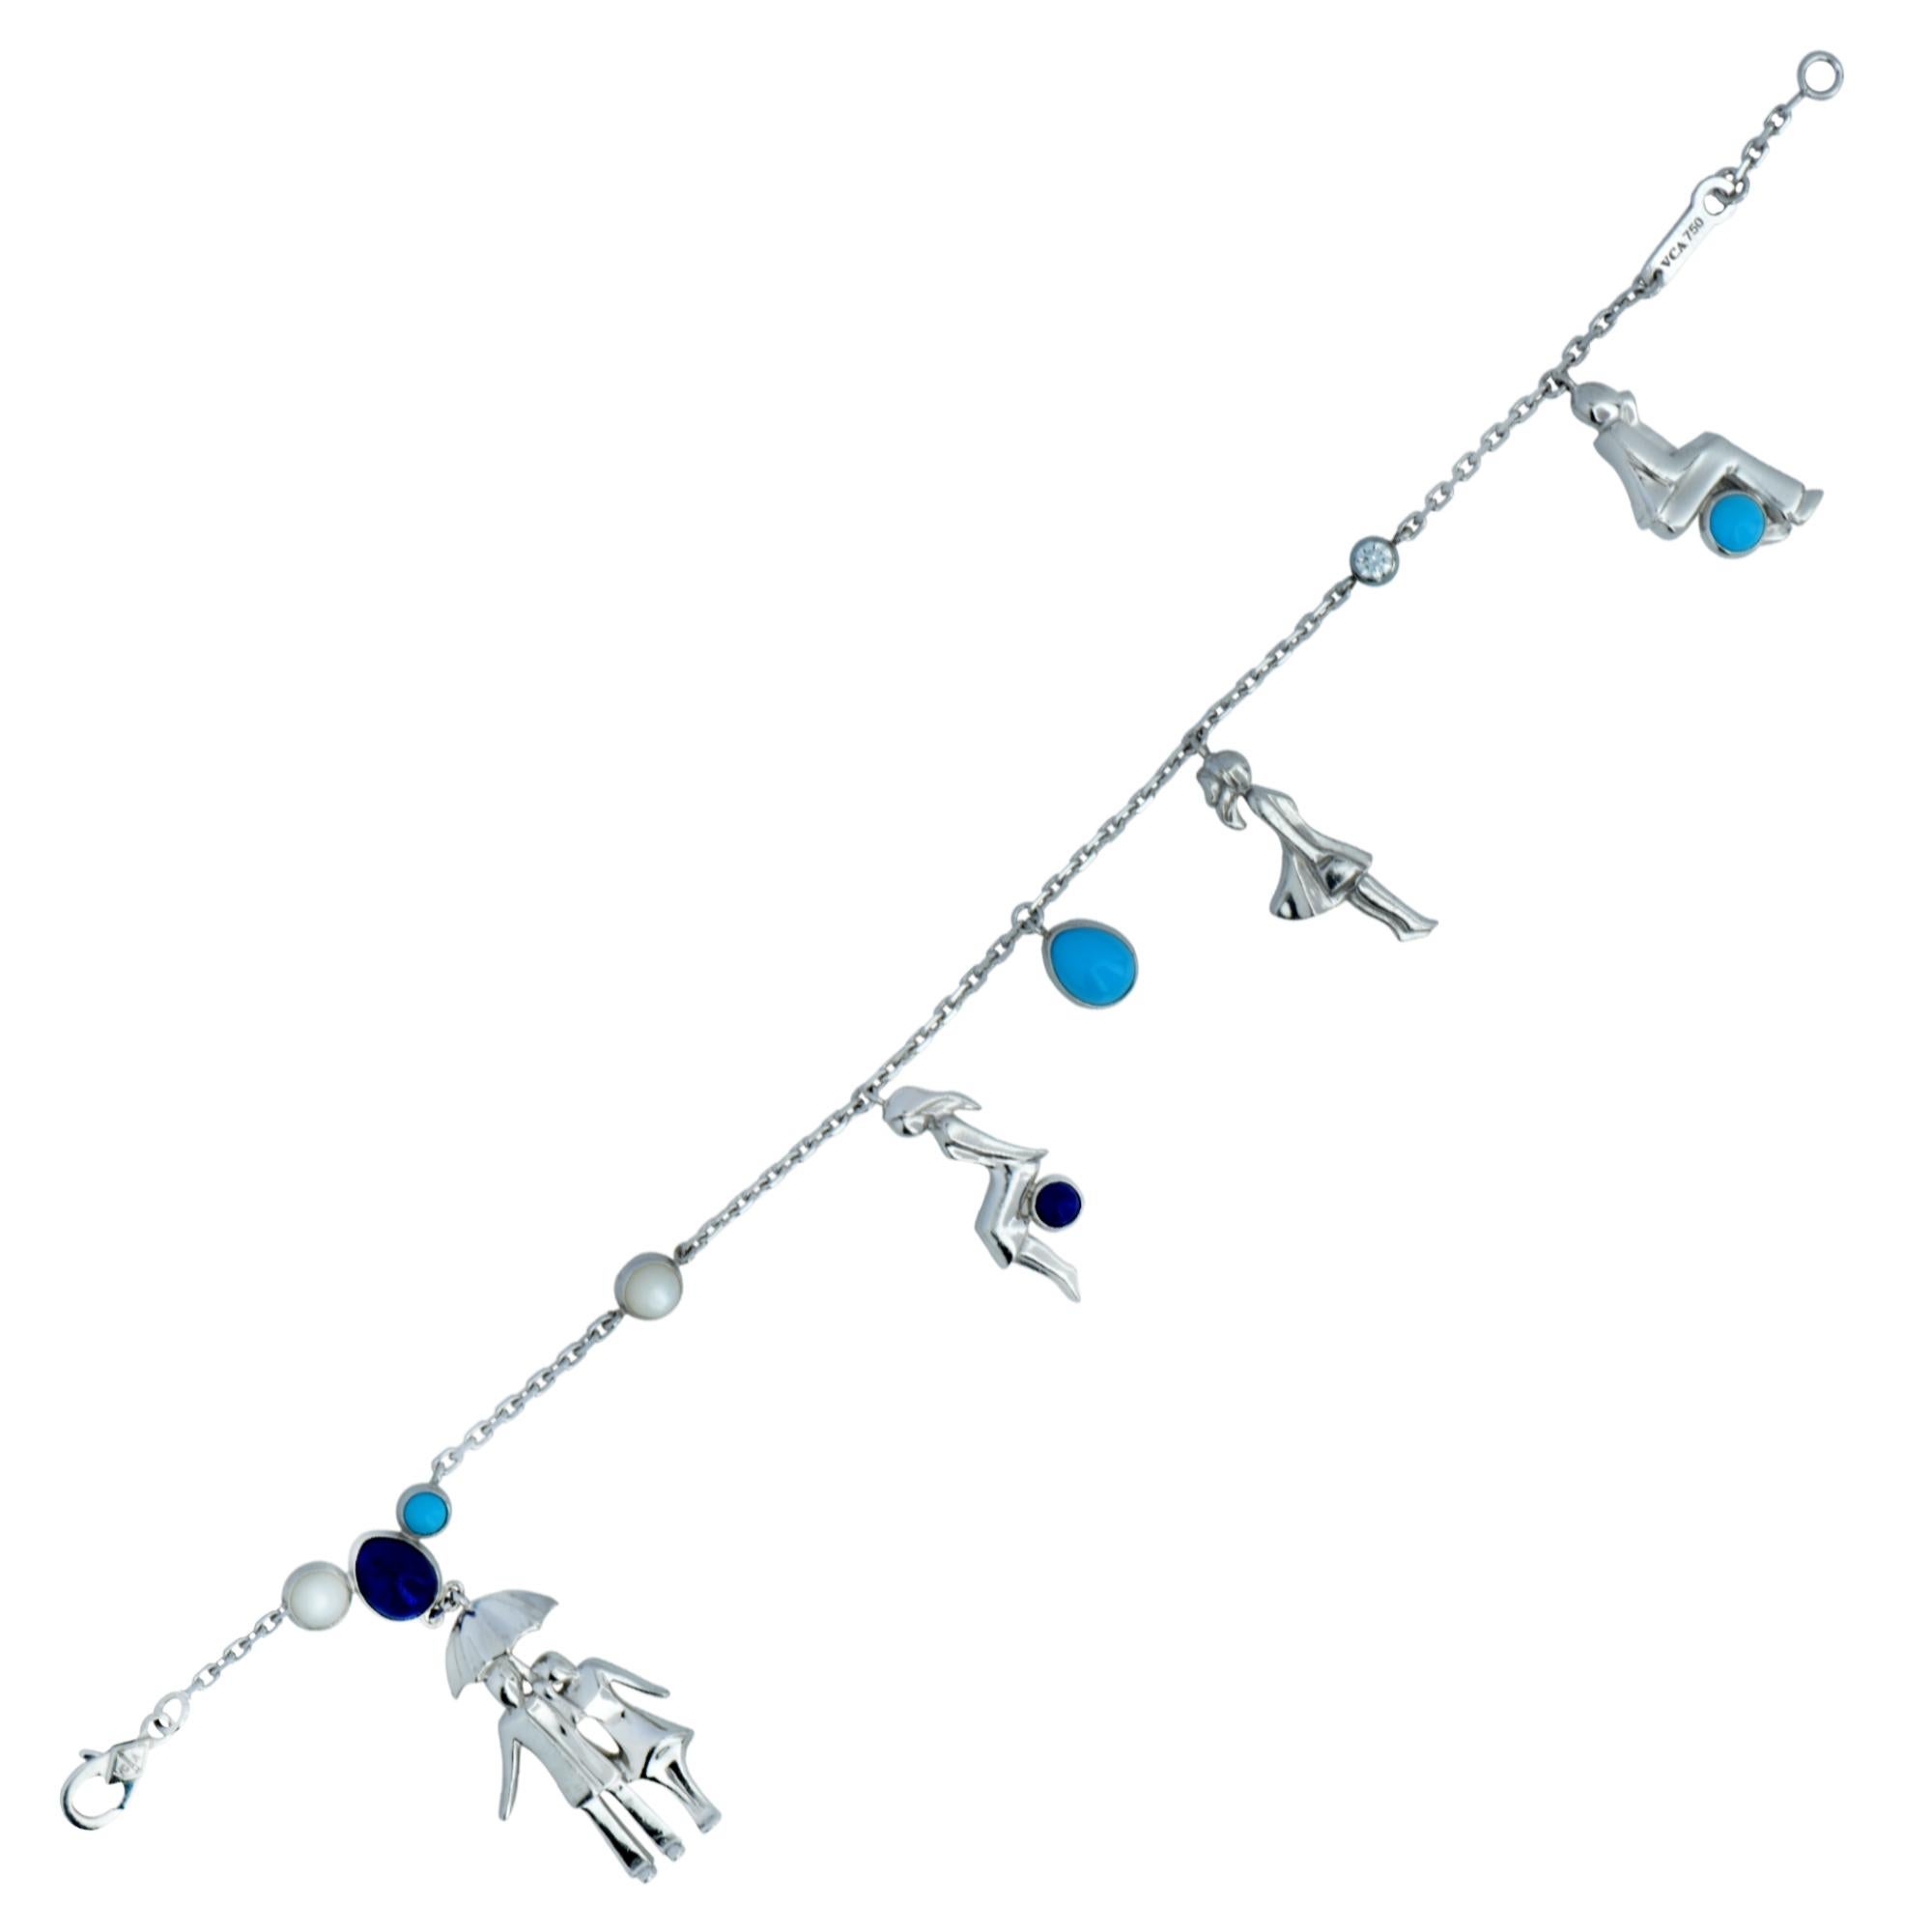 This delightful bracelet from Van Cleef & Arpels’ Romance a Paris Collection, showcases scenes of life, love and romance. The scenes are brought to life in 18 karat white gold, diamond, lapis, turquoise and moon stone, showcasing Van Cleef & Arpels